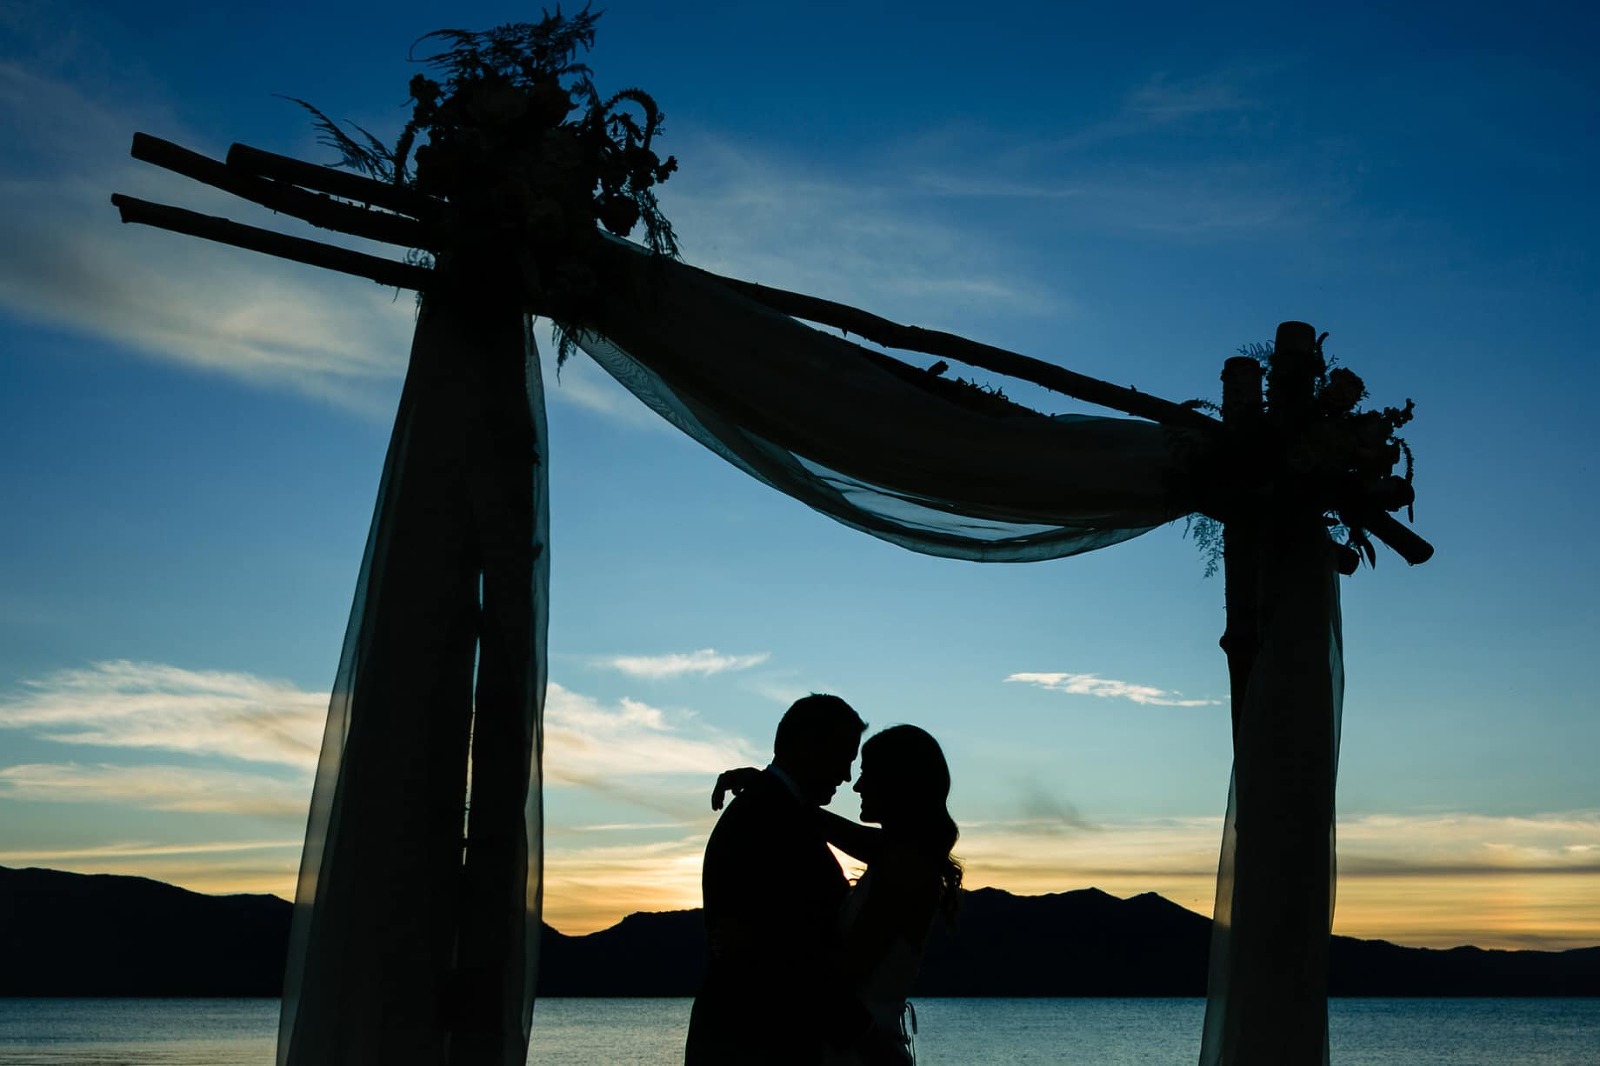 The sunset at a Lake Tahoe Edgewood wedding can be beautiful colors because the venue has views looking both east and west.